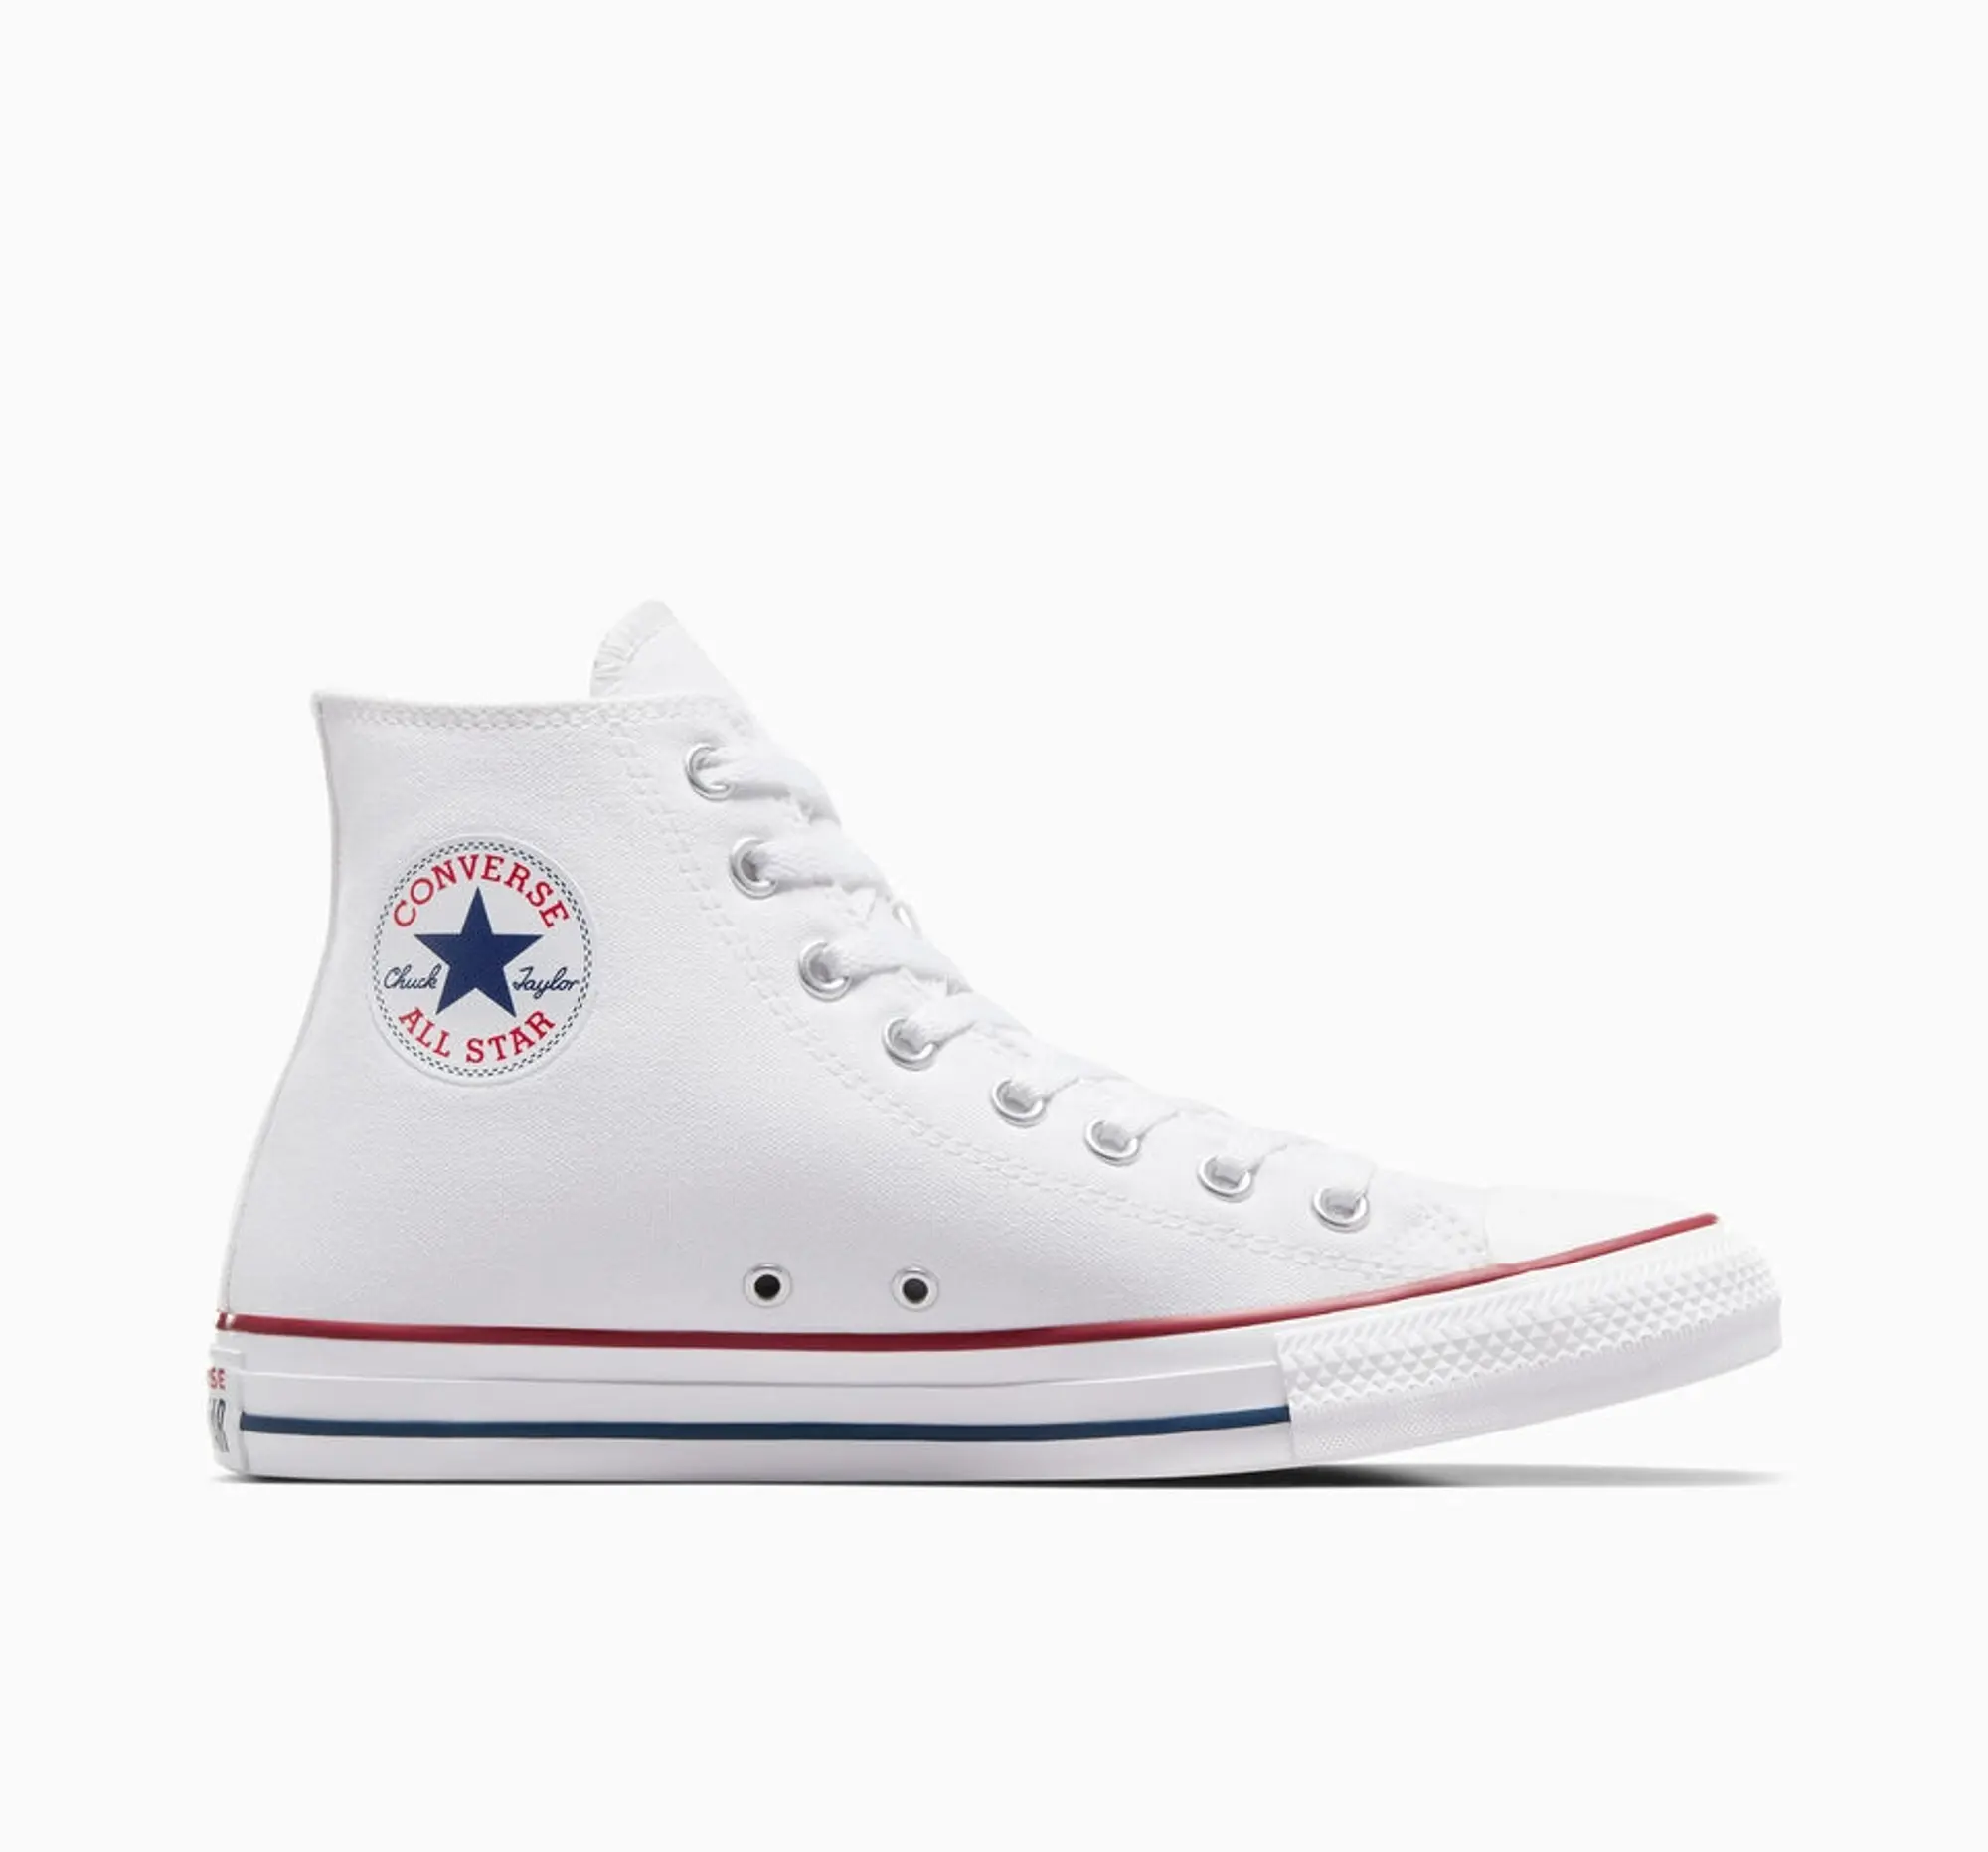 Converse Chuck Taylor All Star Hi White Trainers